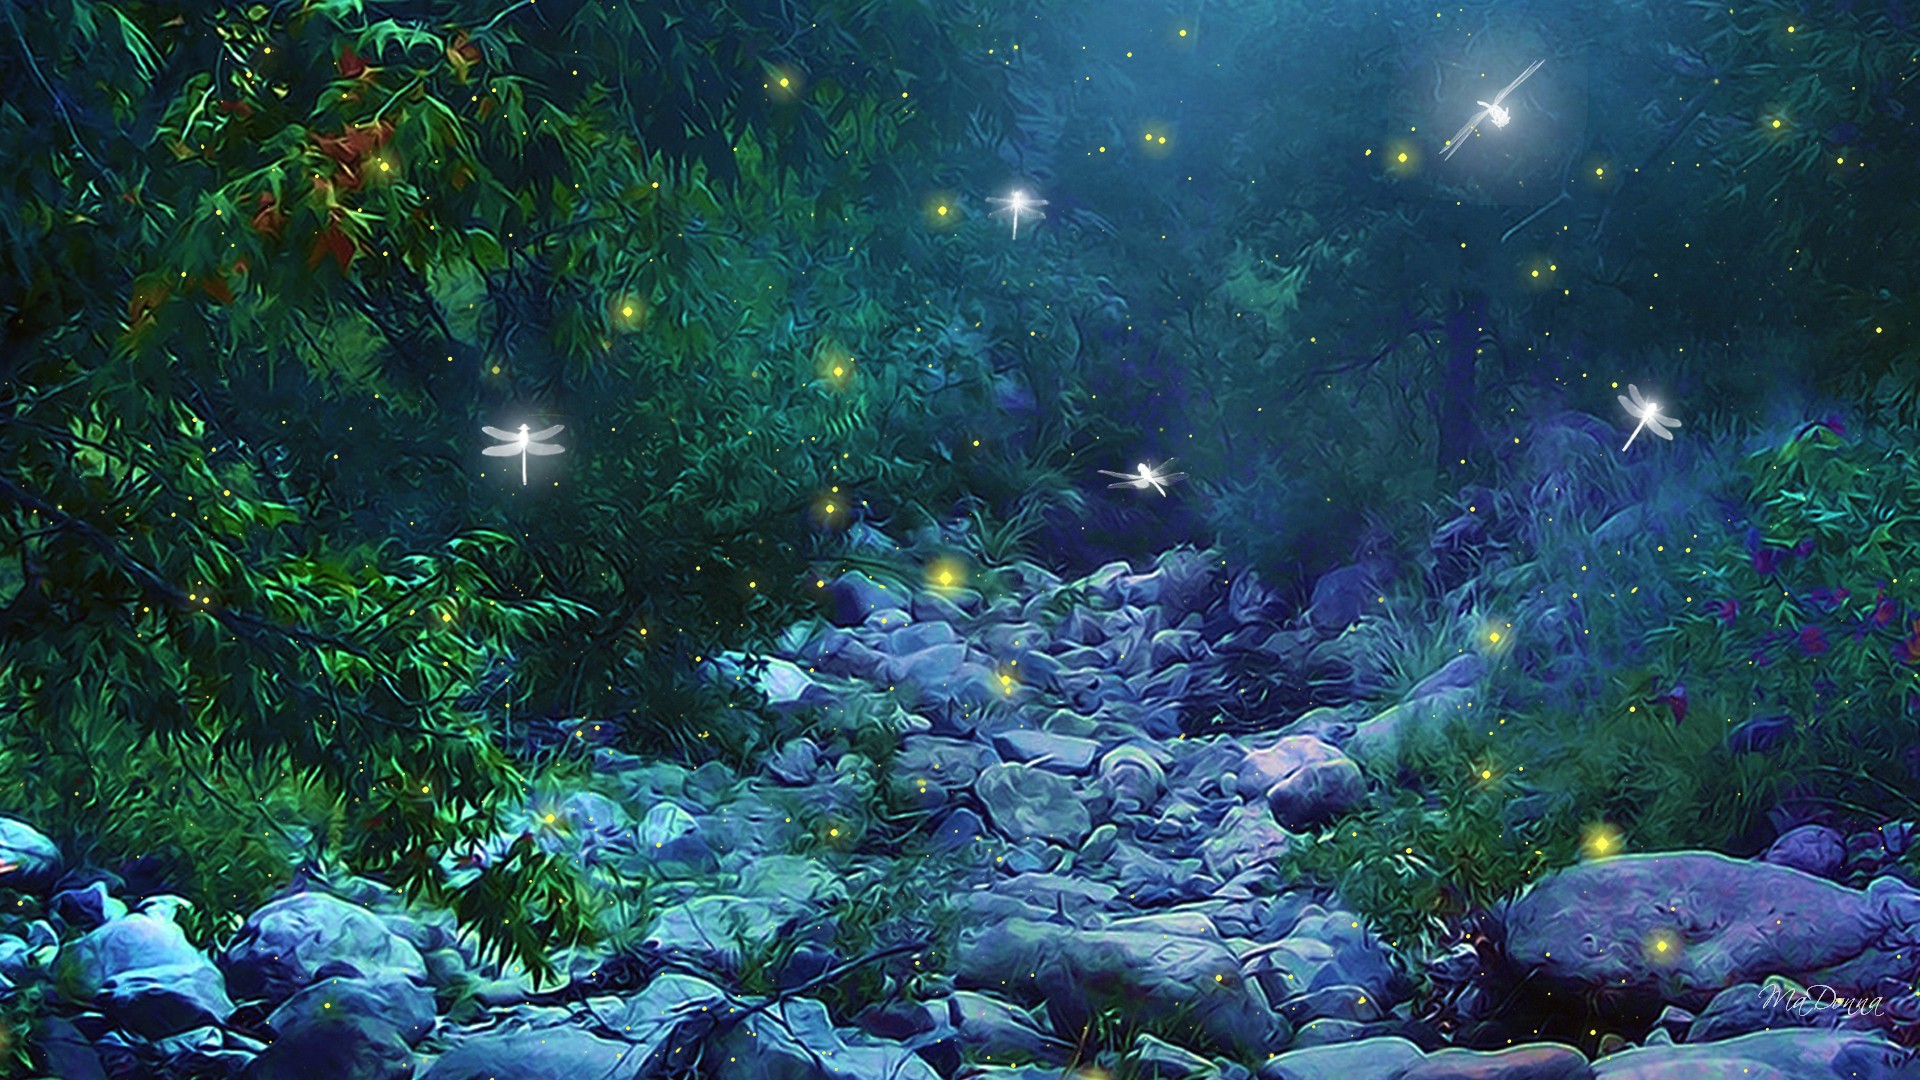 fantasy, Art, Nature, Trees, Forest, Woods, Magic, Insects, Firefly, Night, Glow, Lights Wallpaper HD / Desktop and Mobile Background